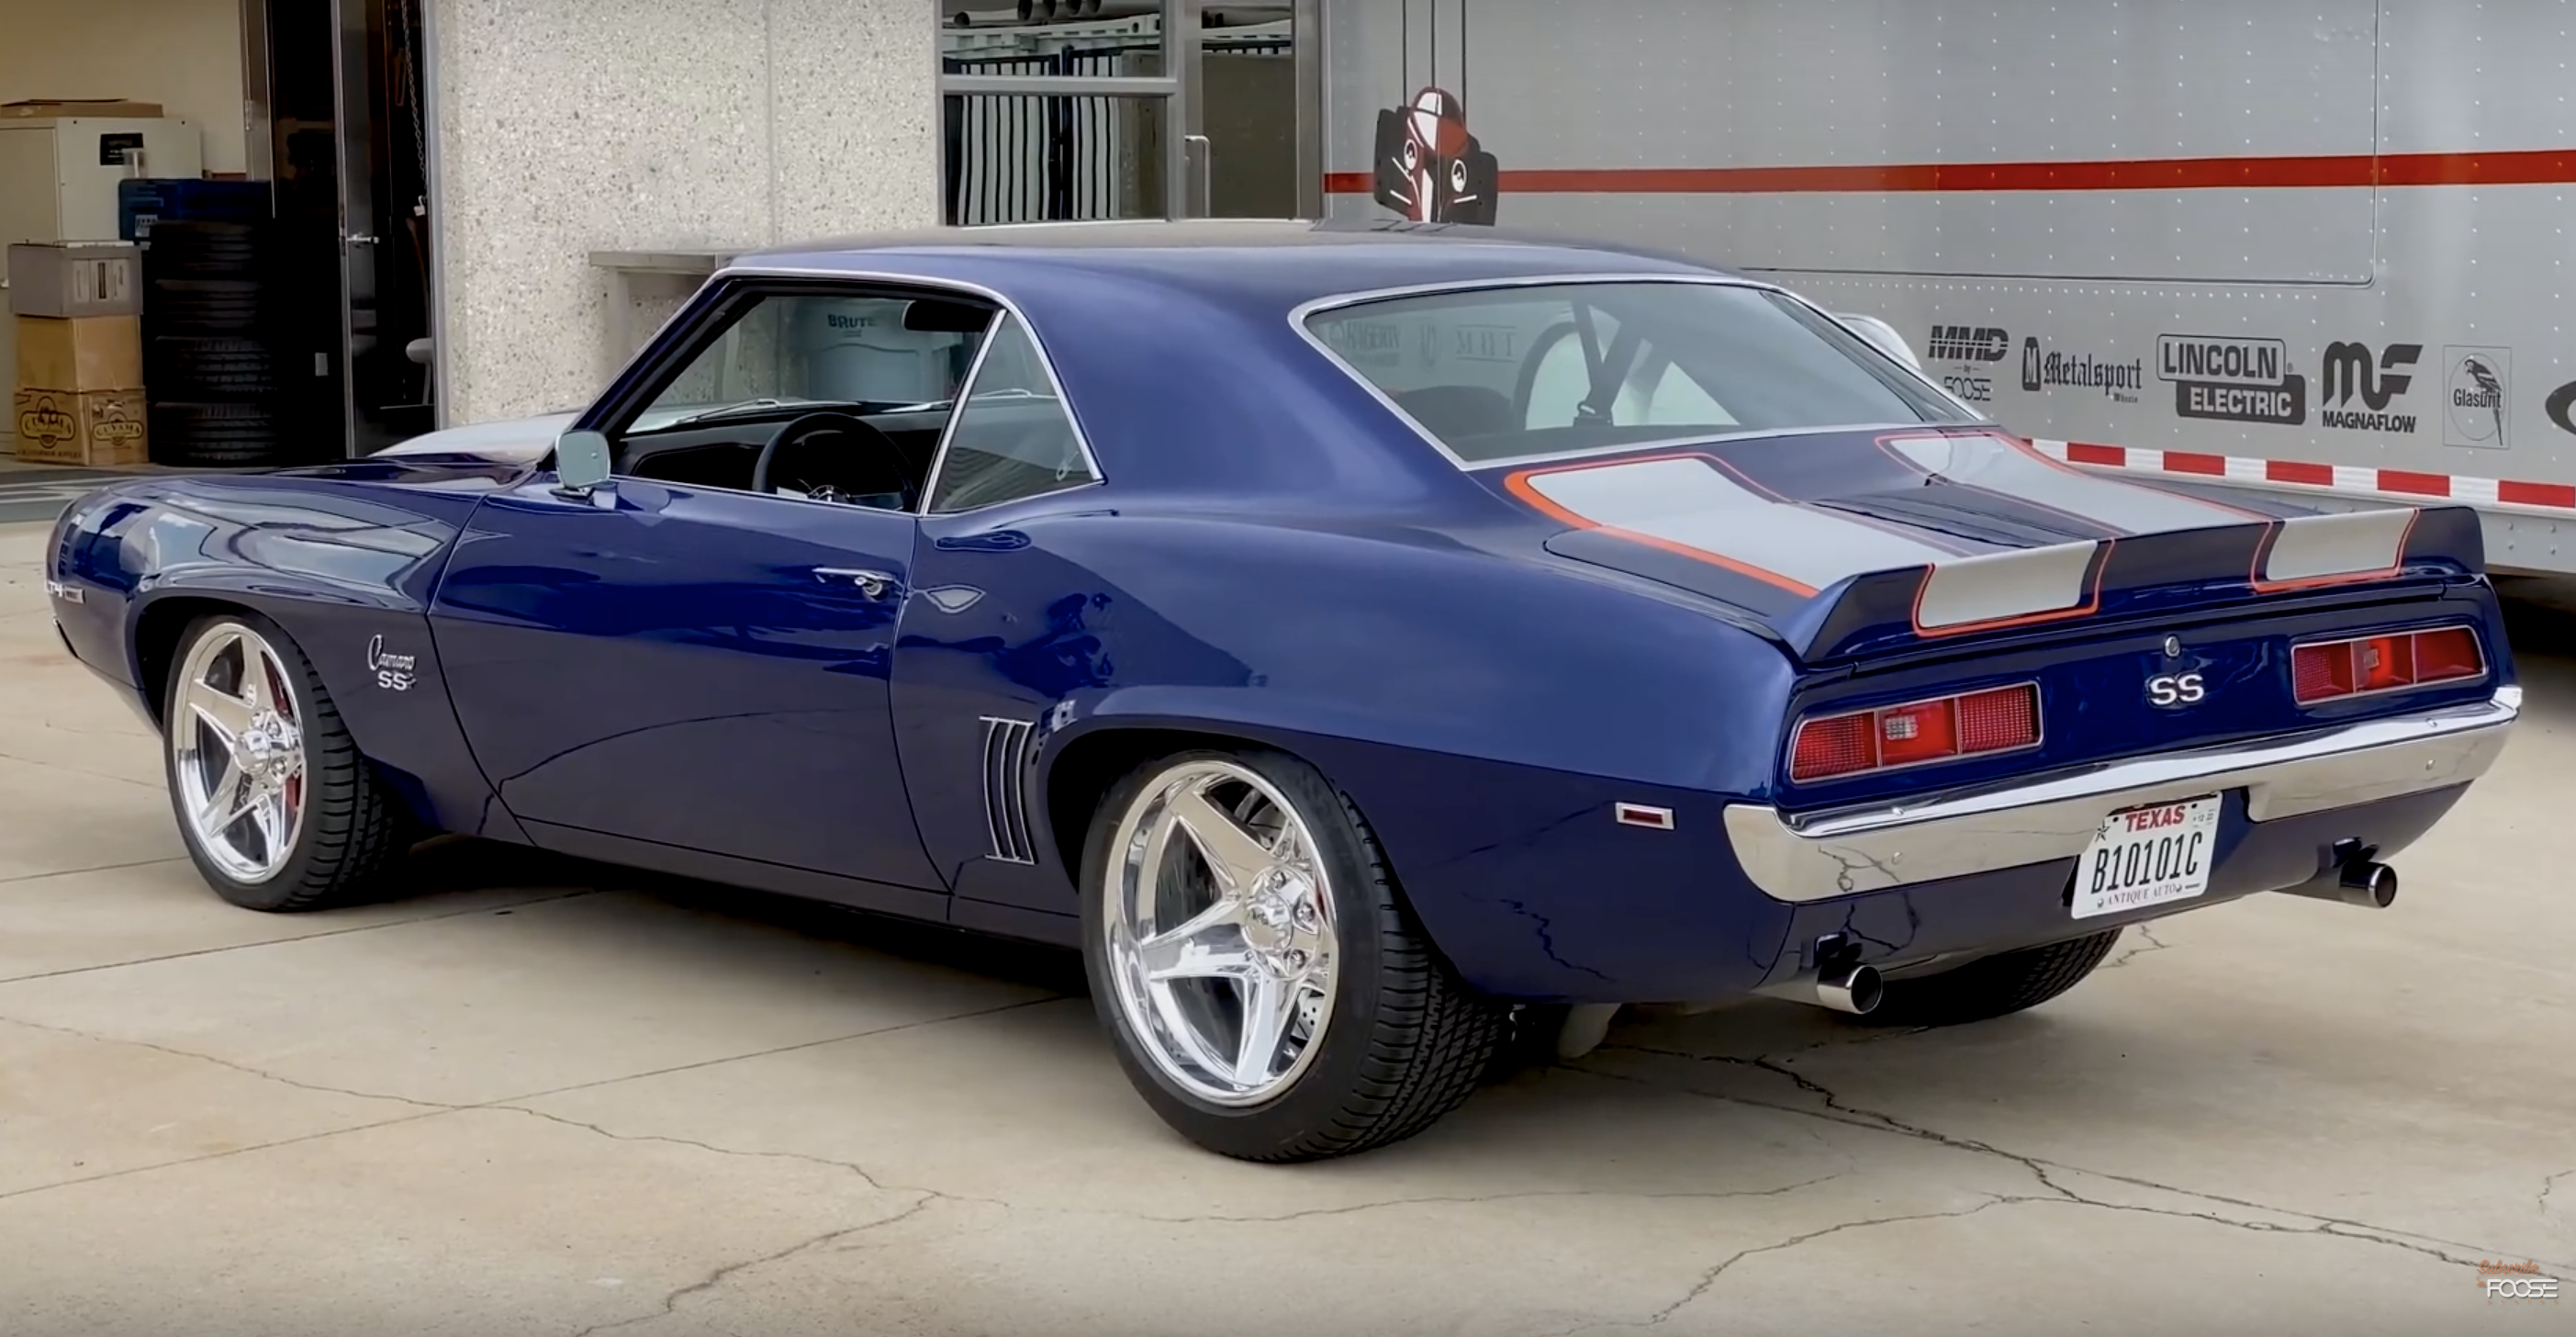 Chip Foose on X: #tbt Our '69 #Camaro #restomod featured trimmed